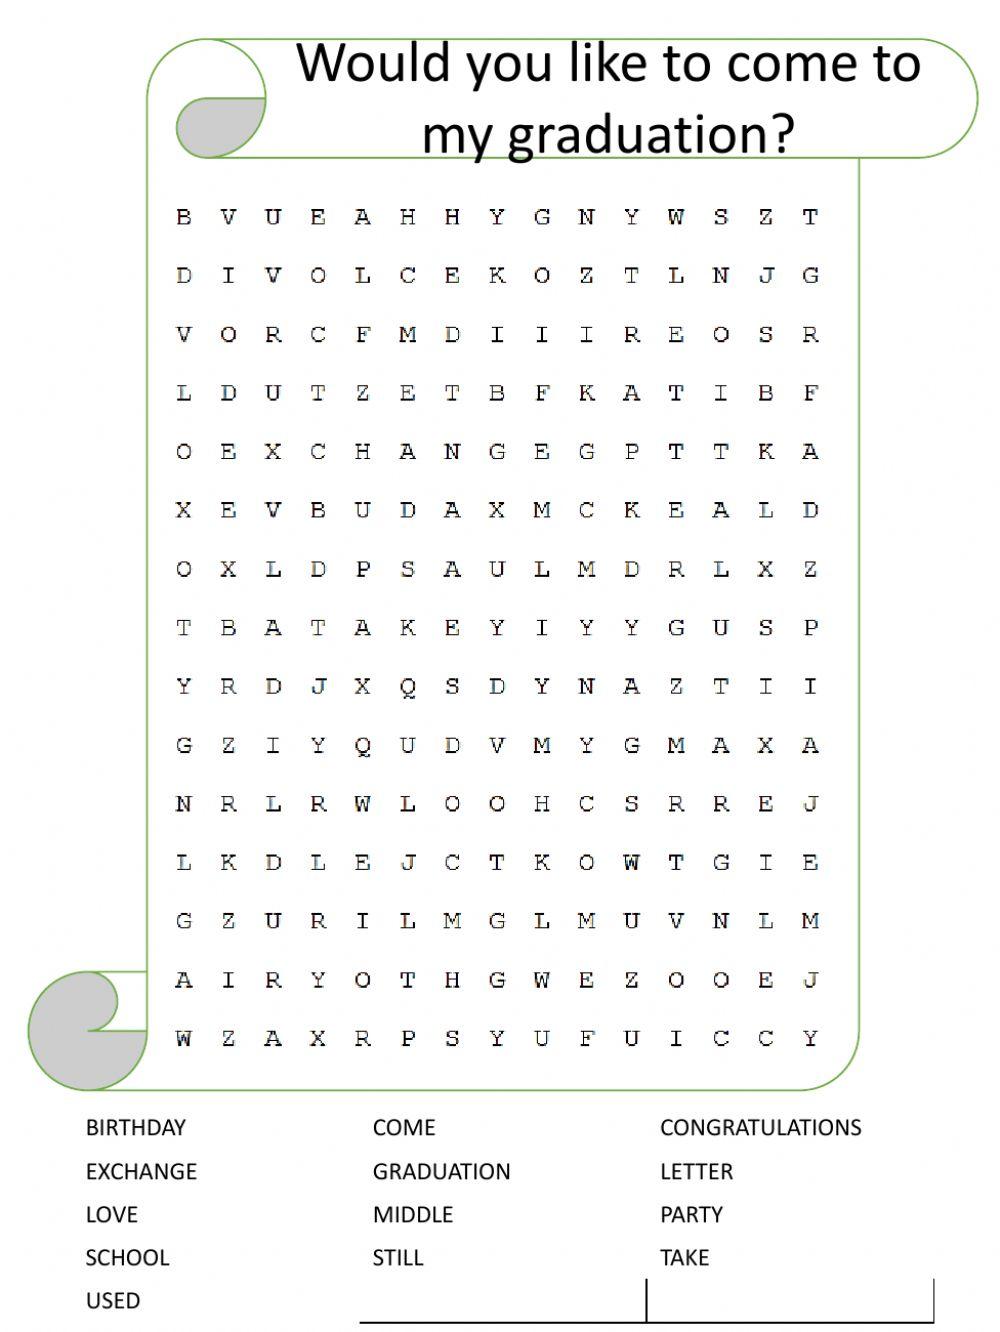 Would you like to come to my graduation? - Word Search